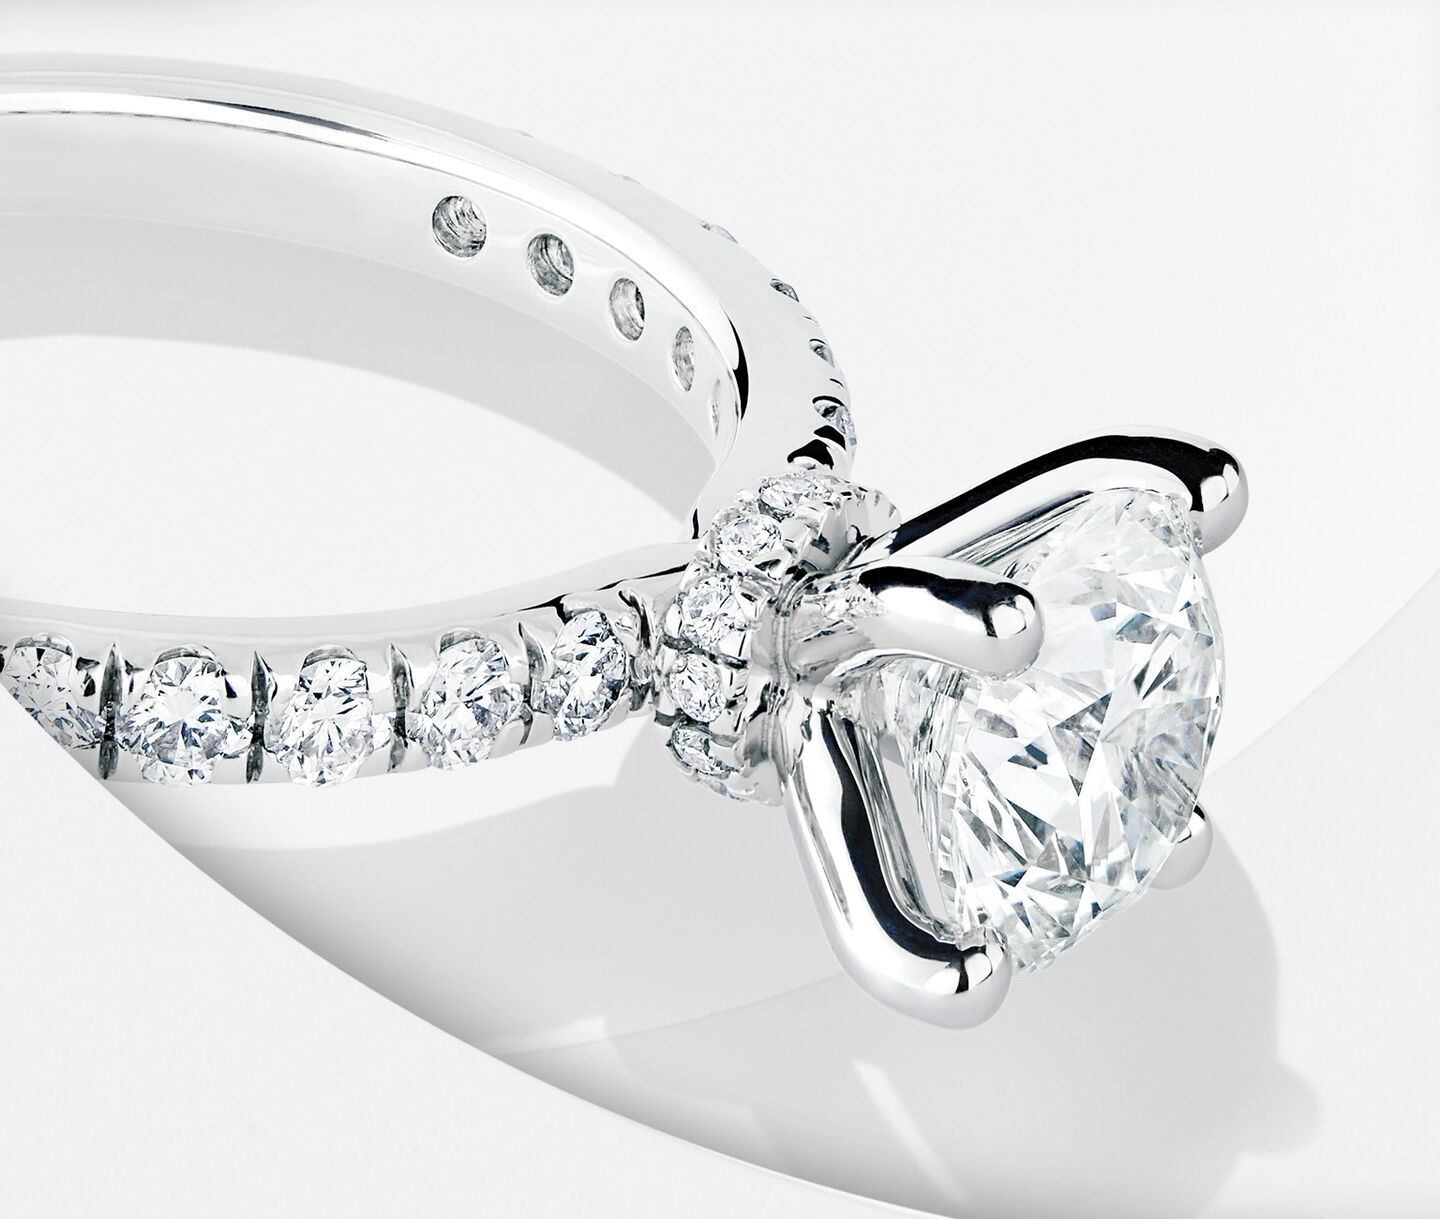 A Birks Deco diamond engagement ring on a white background.